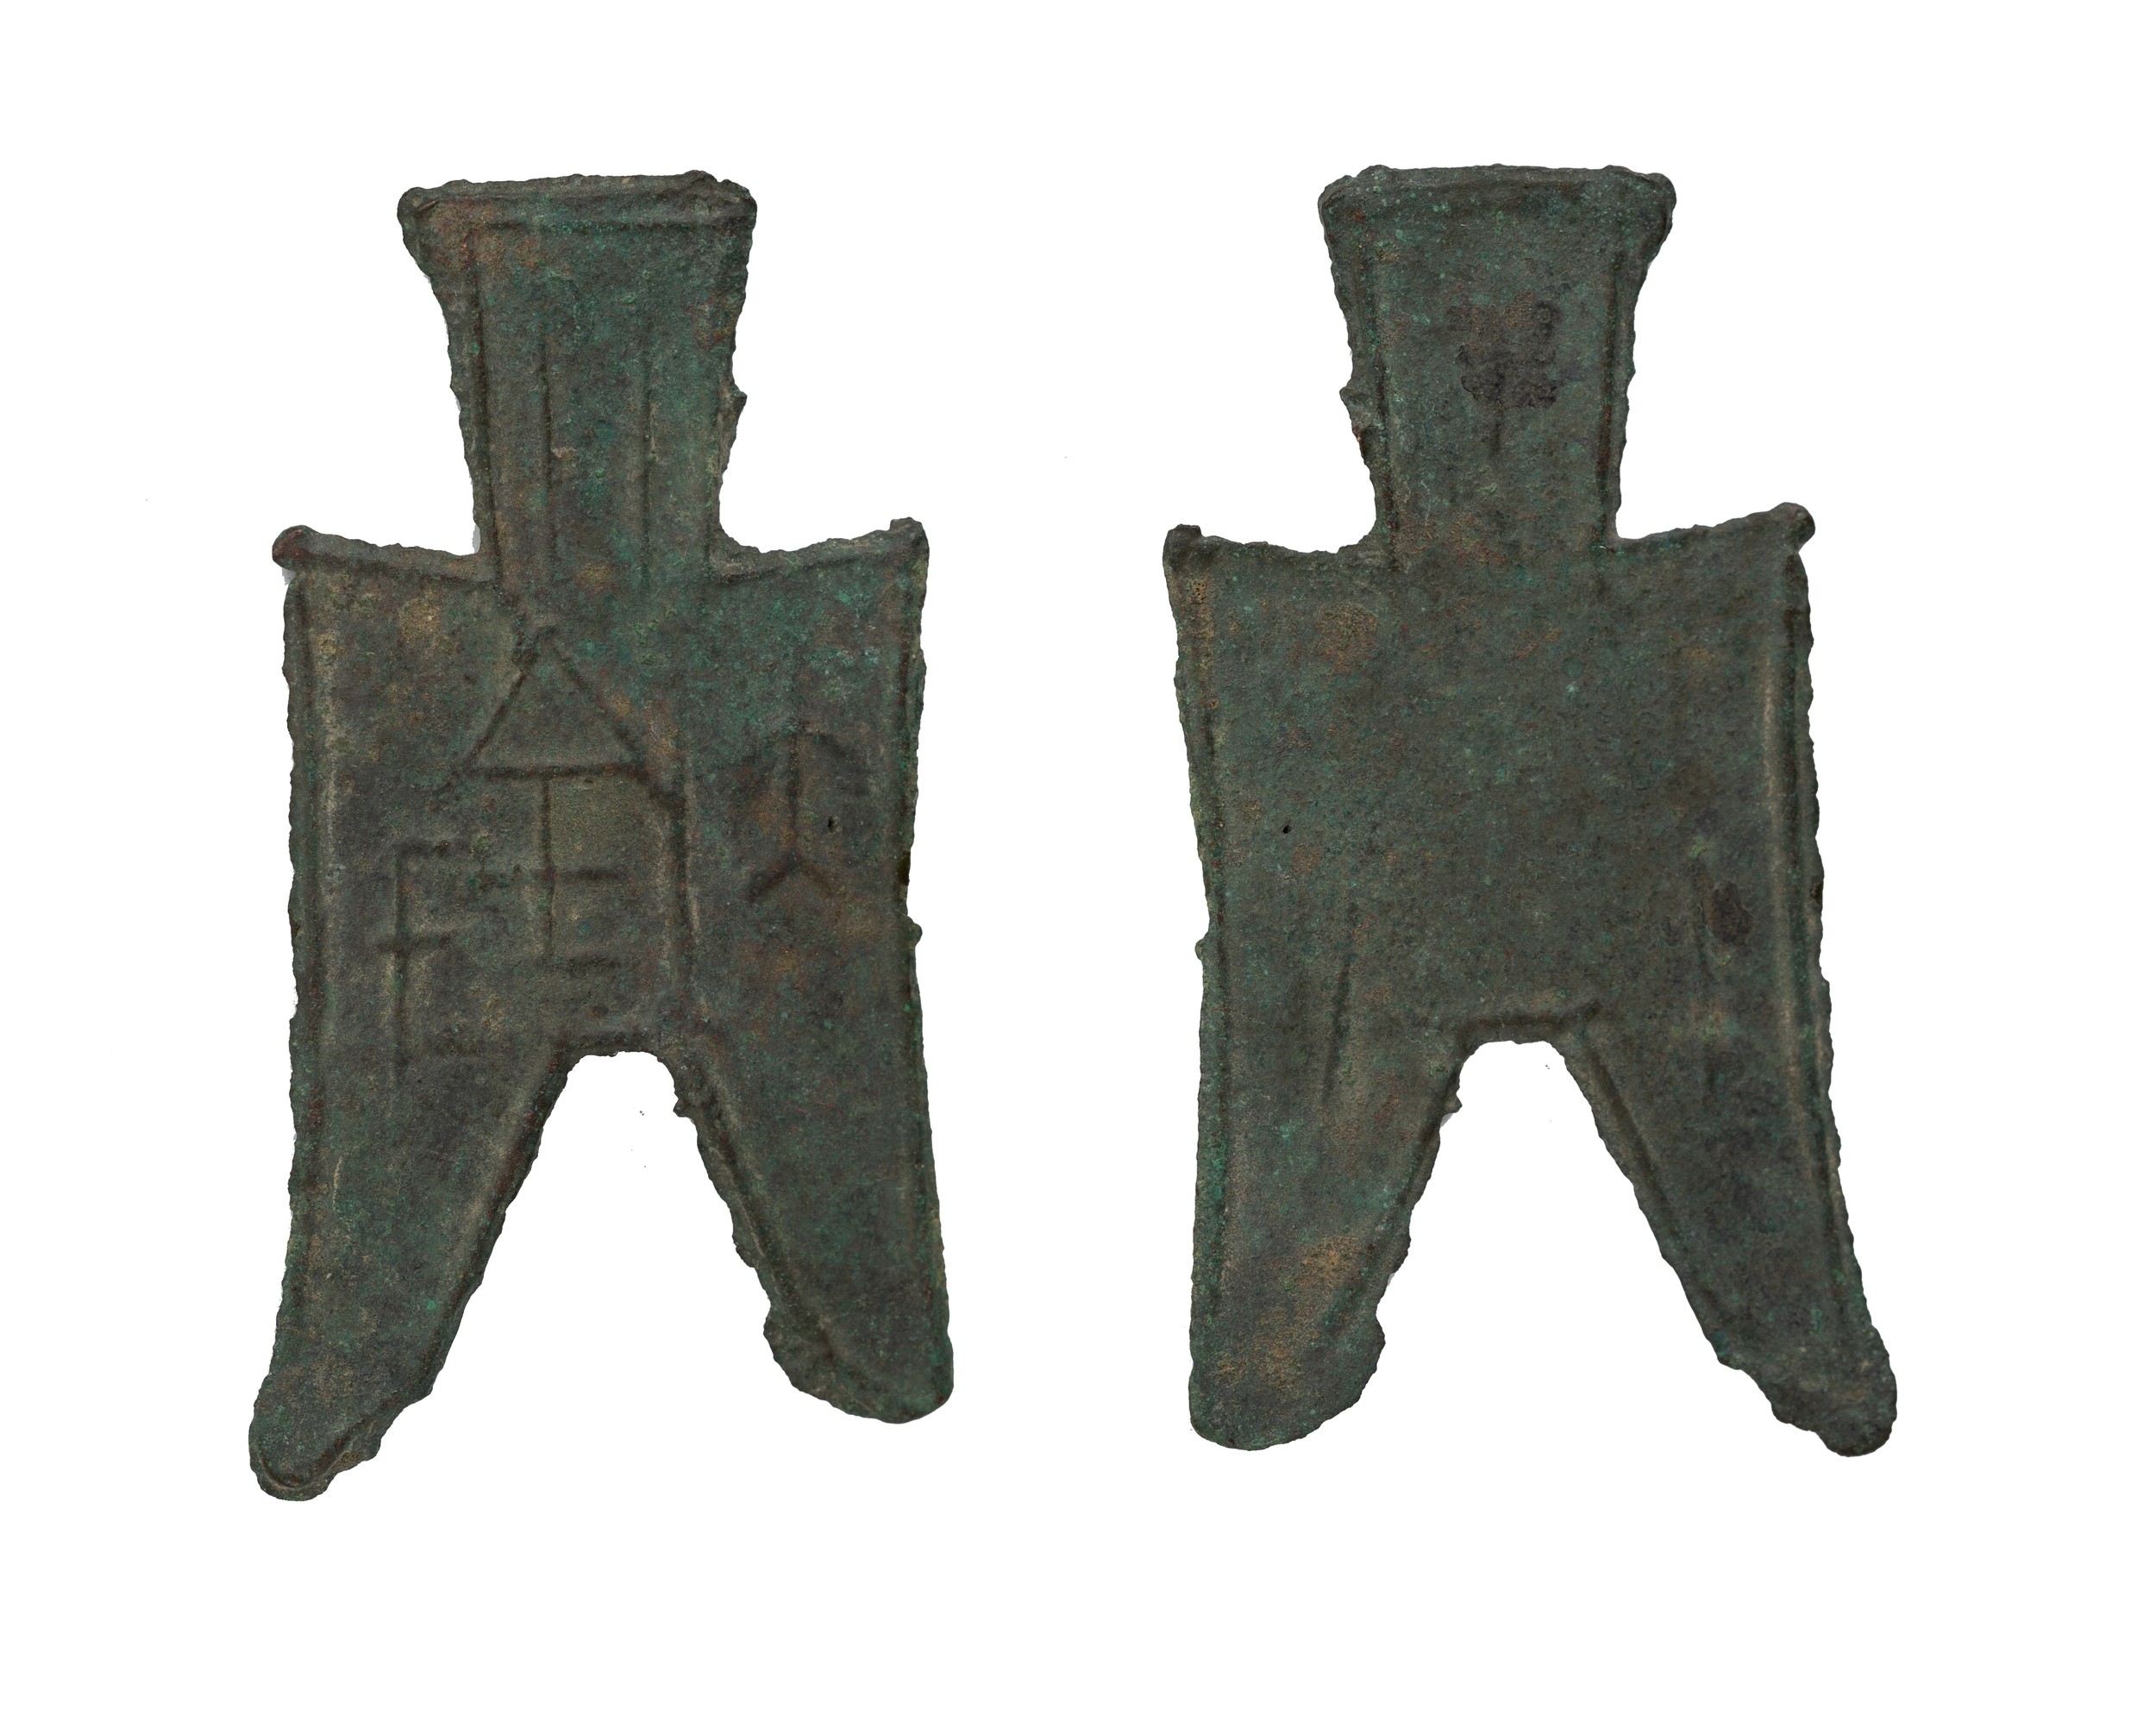 A CHINESE POINTED FOOT SPADE COIN, DA YIN, WARRING STATES PERIOD (475-221BC). 5.6cm x 3cm. Weight